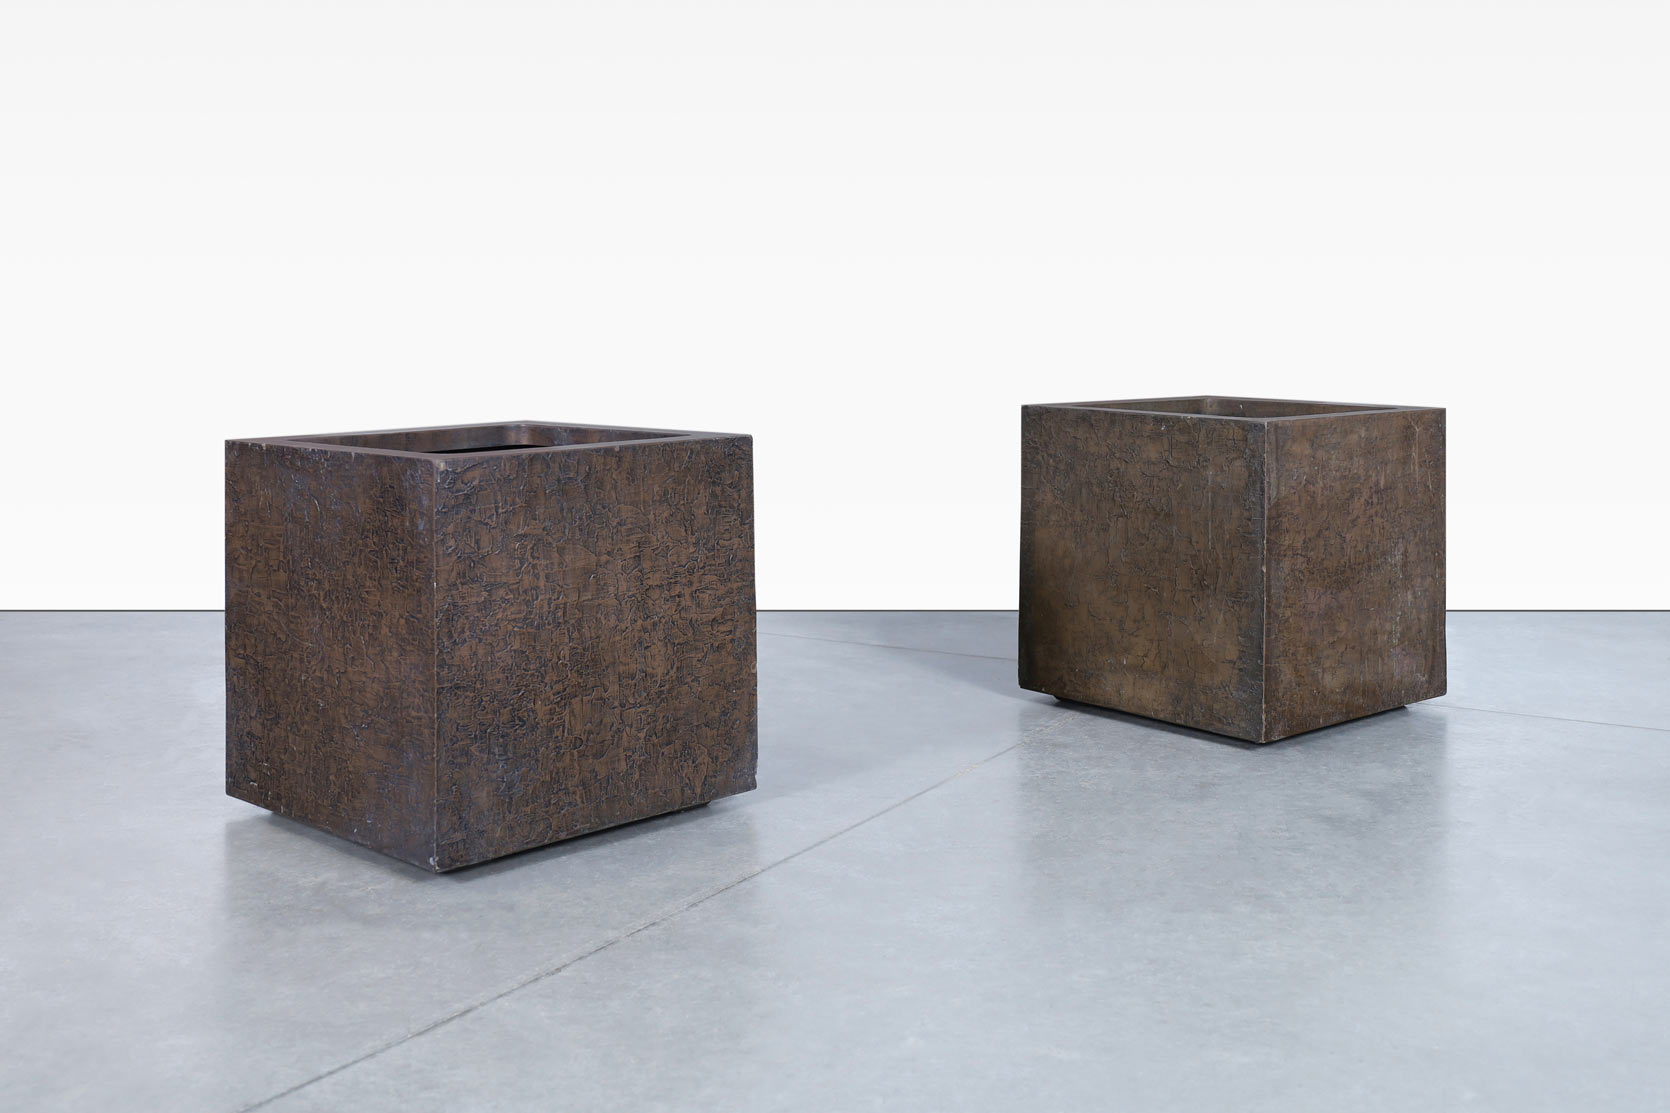 Vintage Bronze Resin Square Planters by Forms and Surfaces